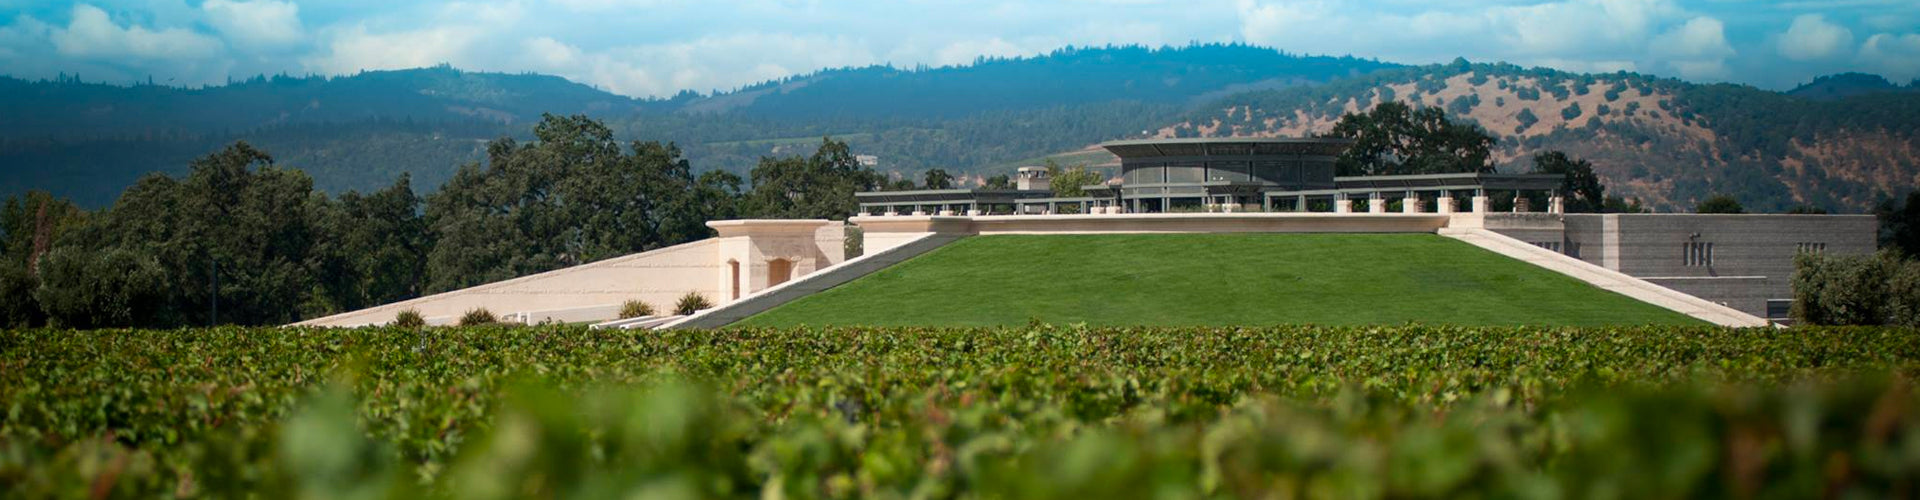 Opus One Winery in California's Napa Valley